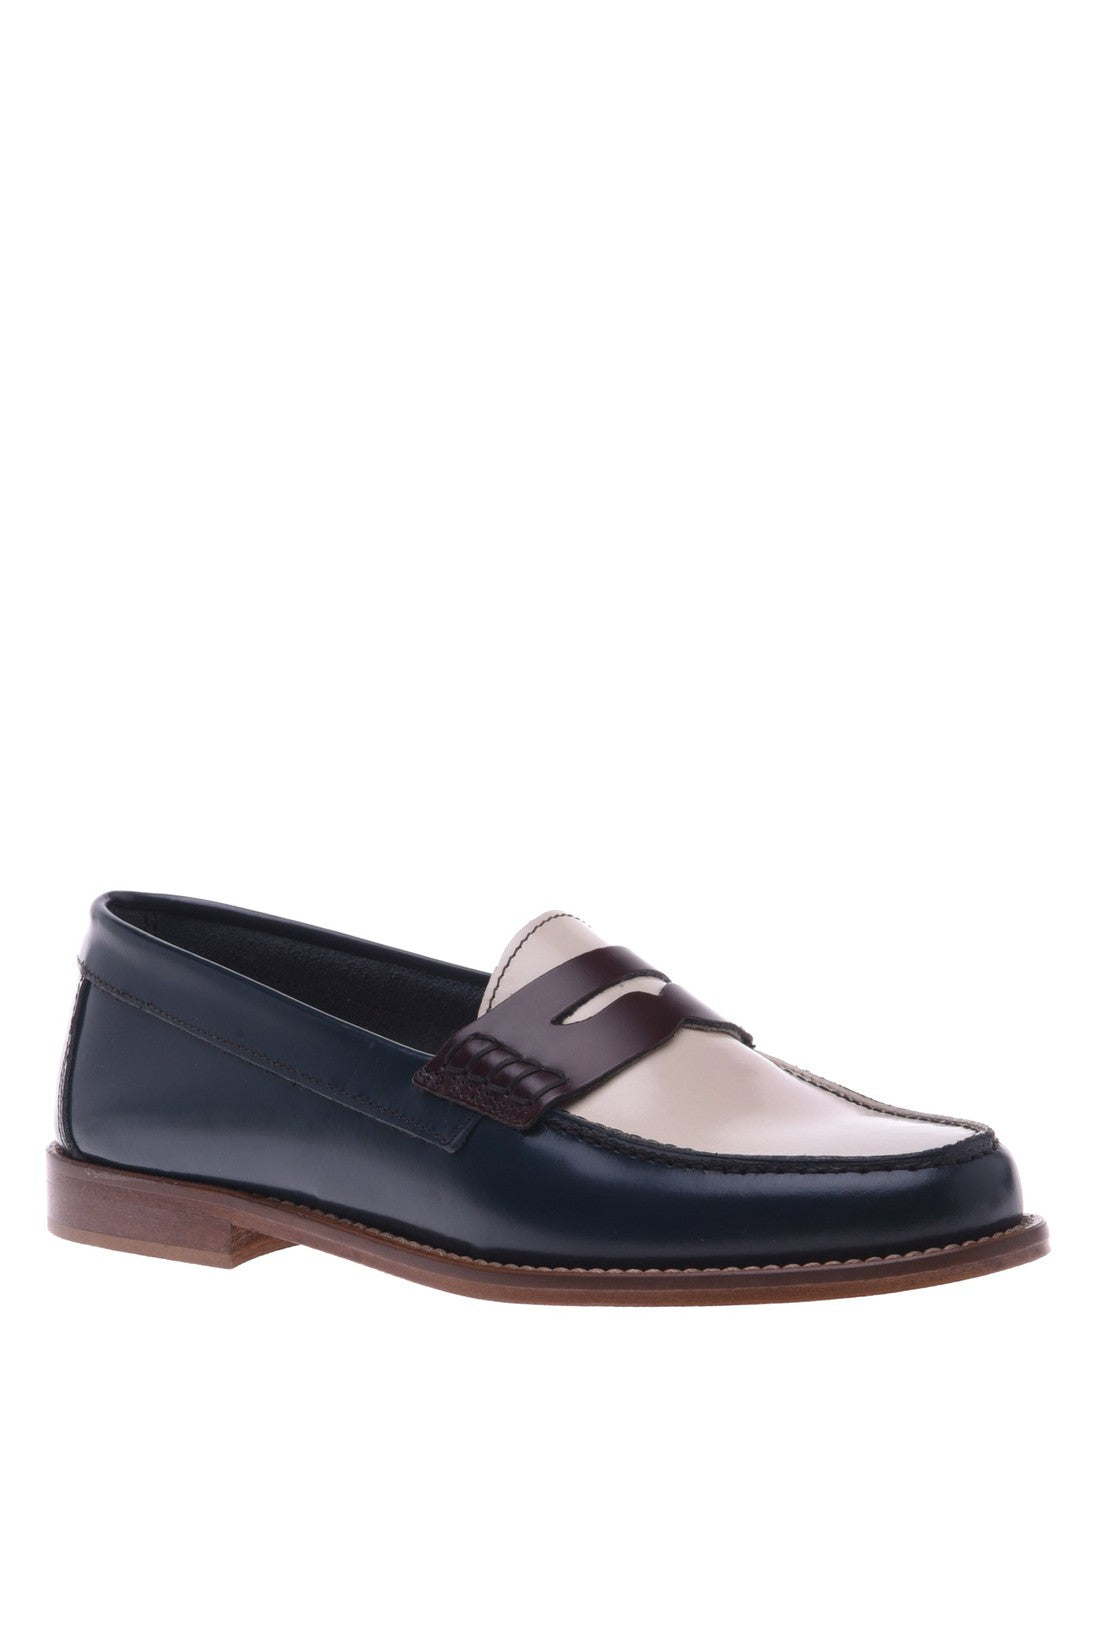 Loafer in green and cream shiny calfskin